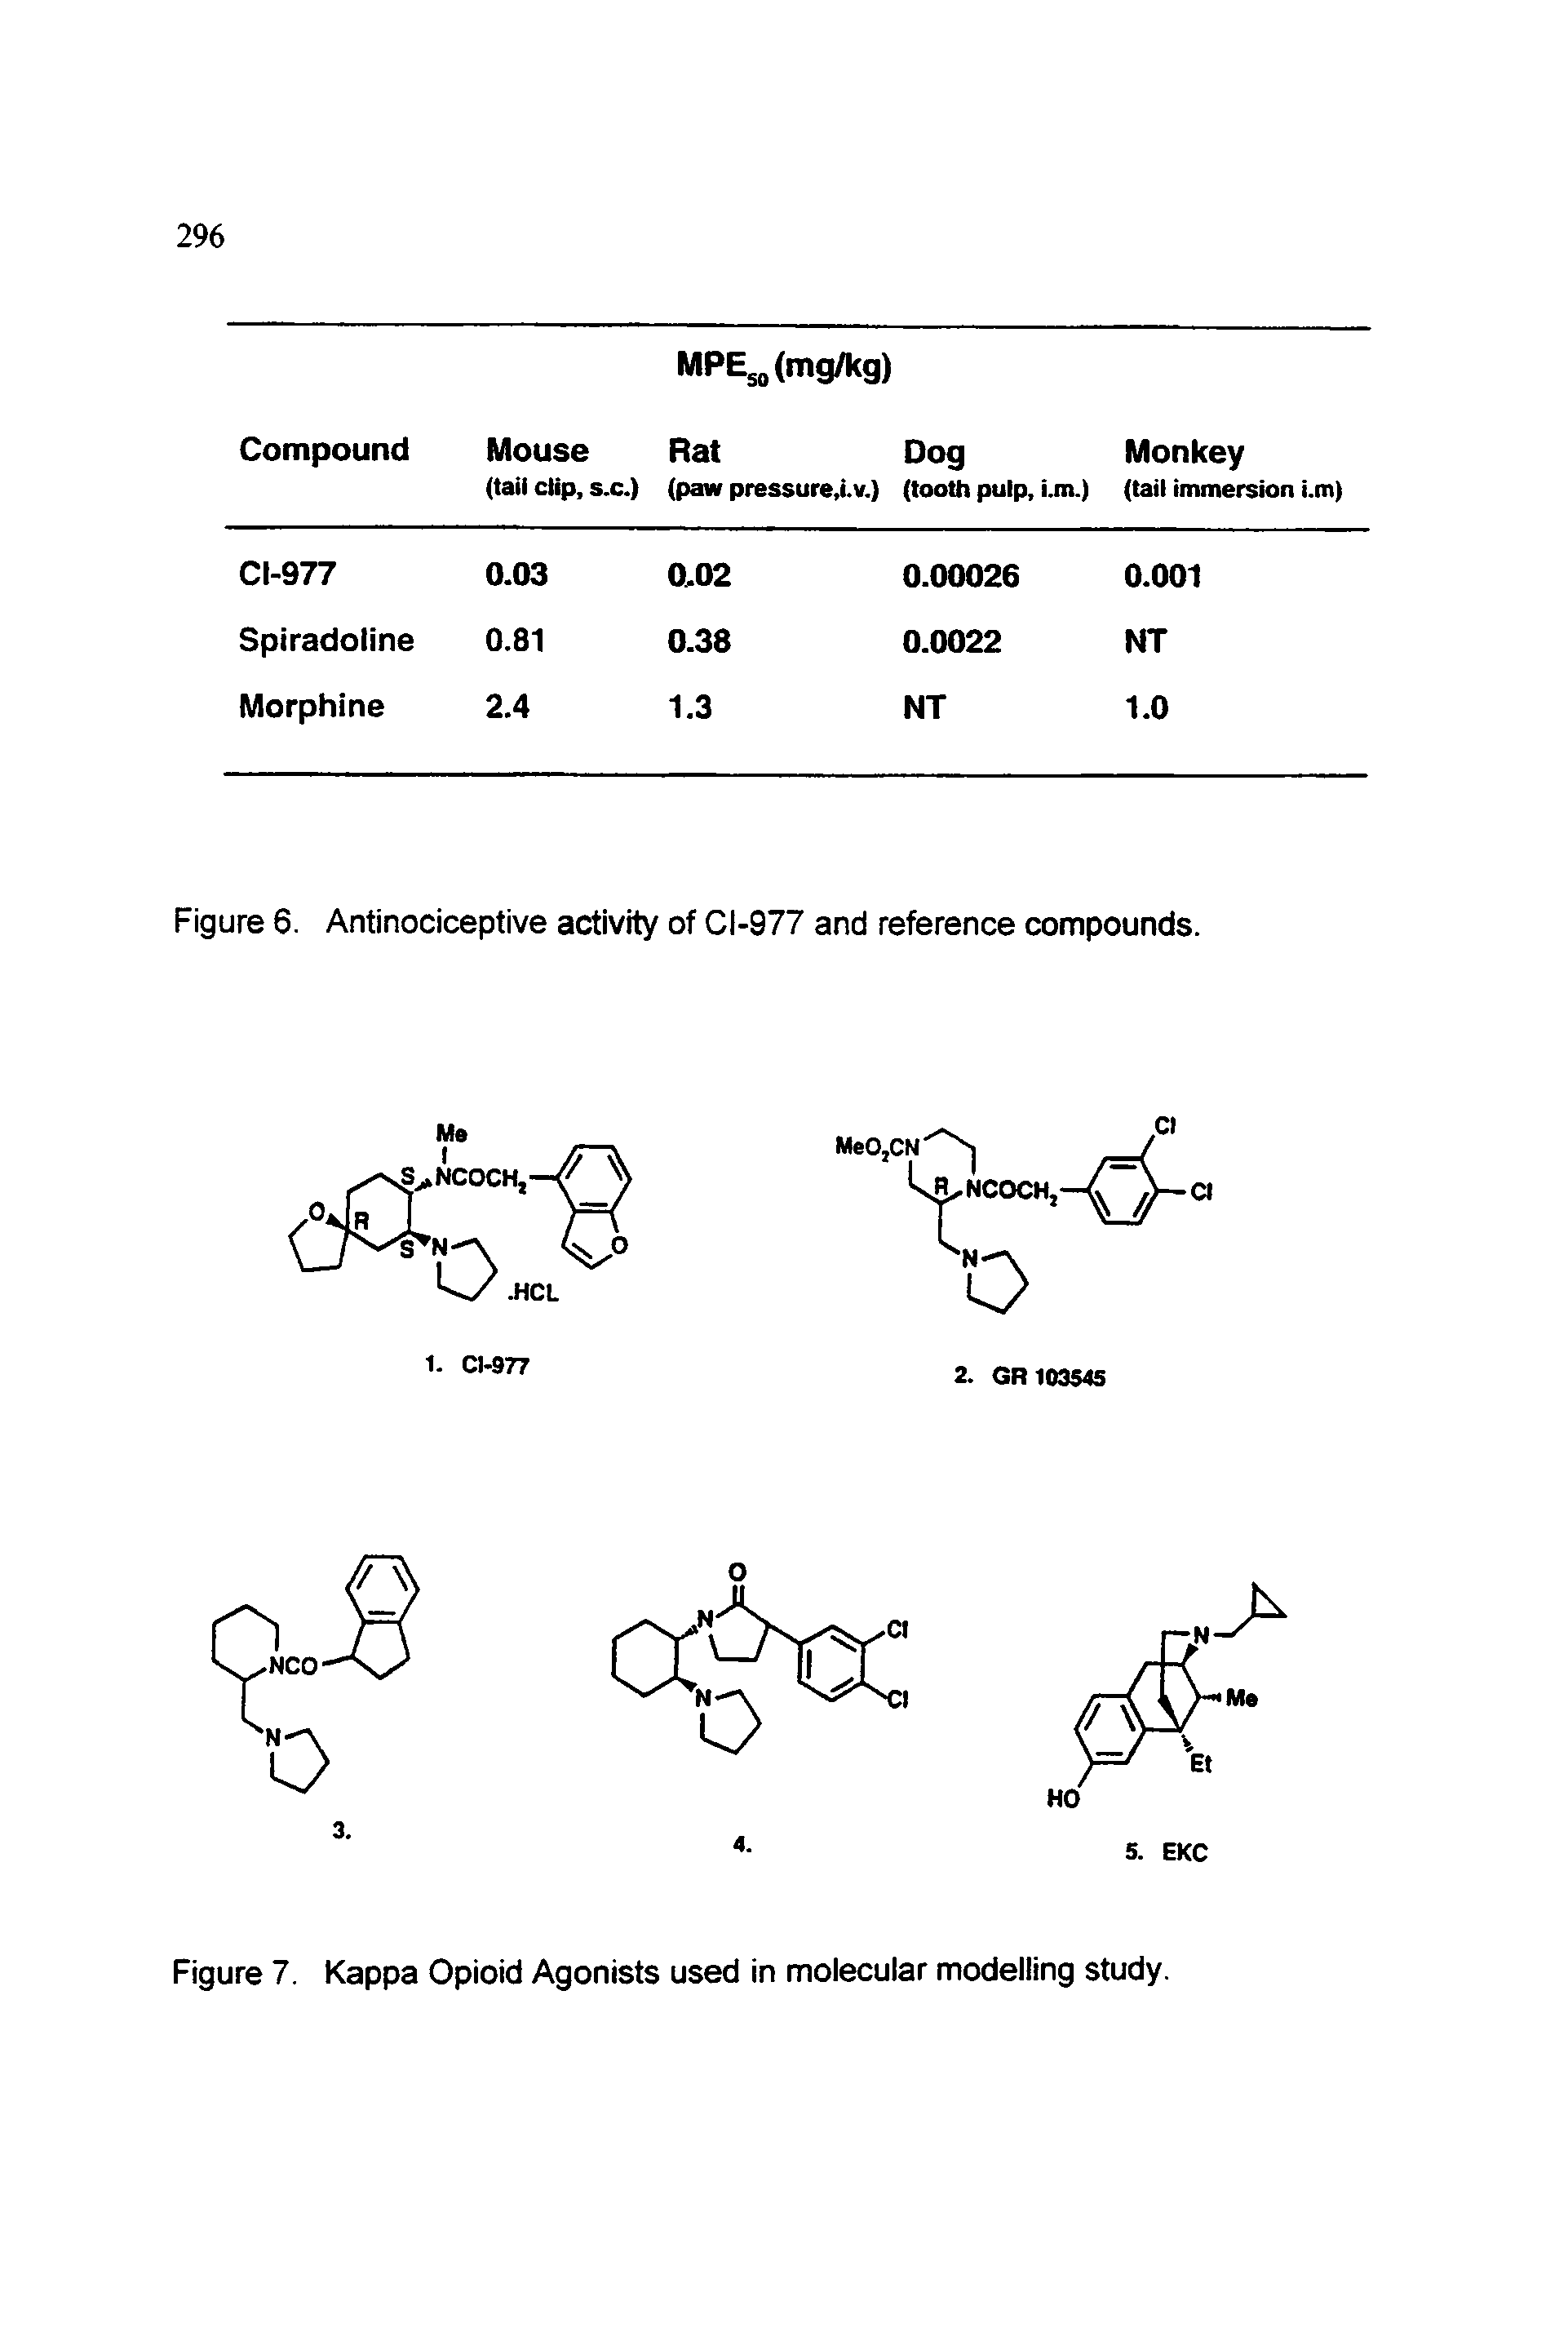 Figure 7. Kappa Opioid Agonists used in moiecular modelling study.